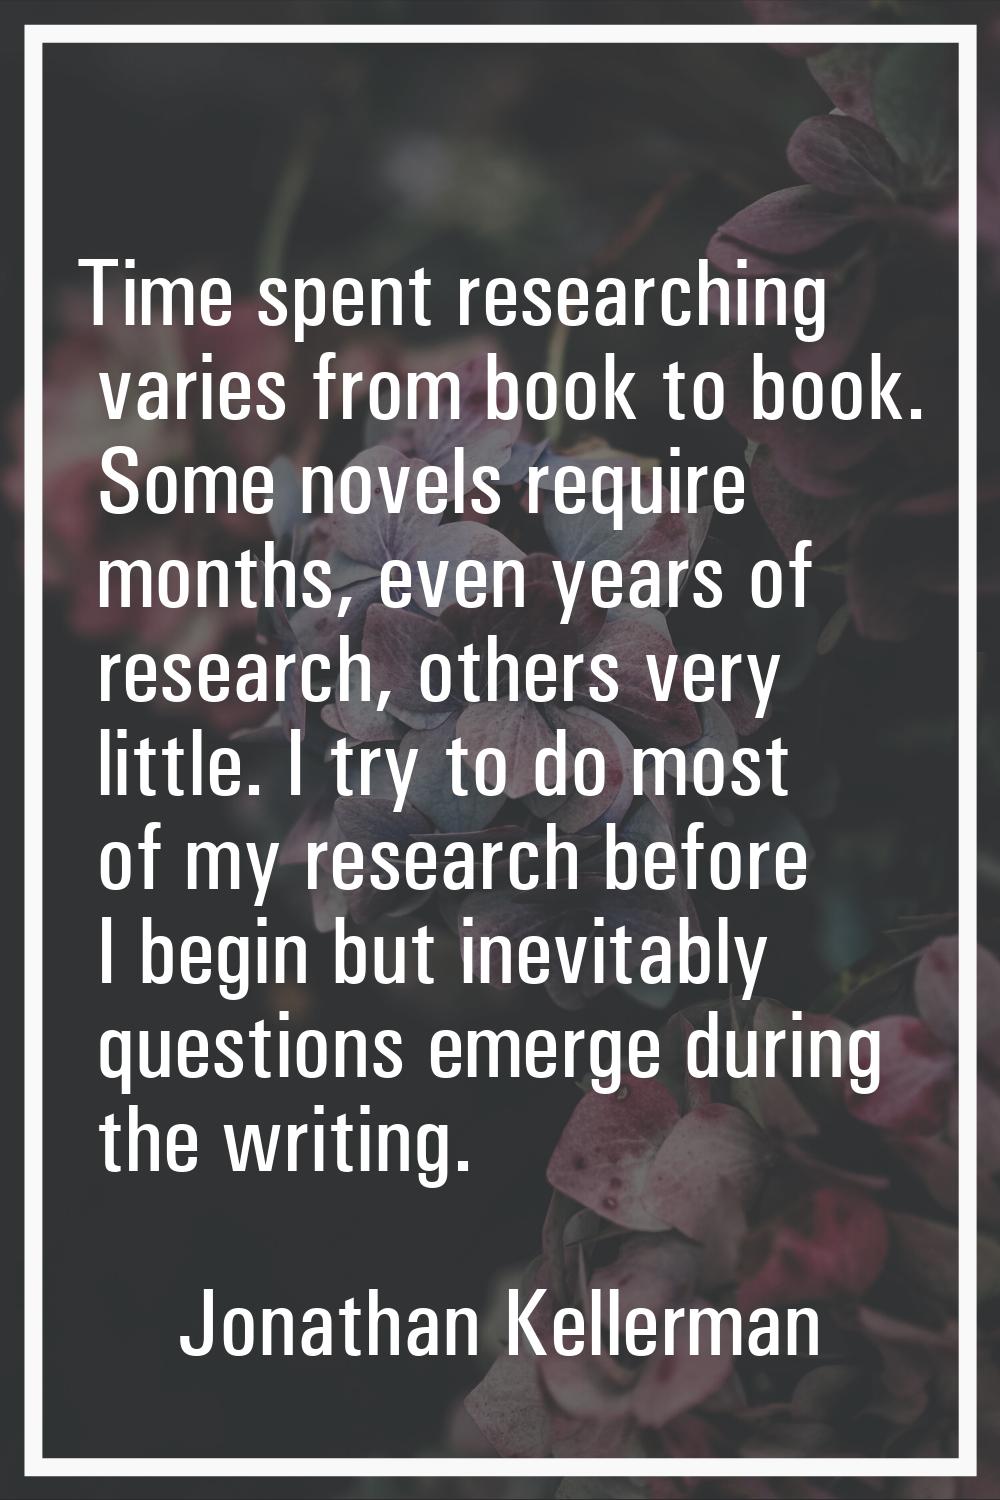 Time spent researching varies from book to book. Some novels require months, even years of research